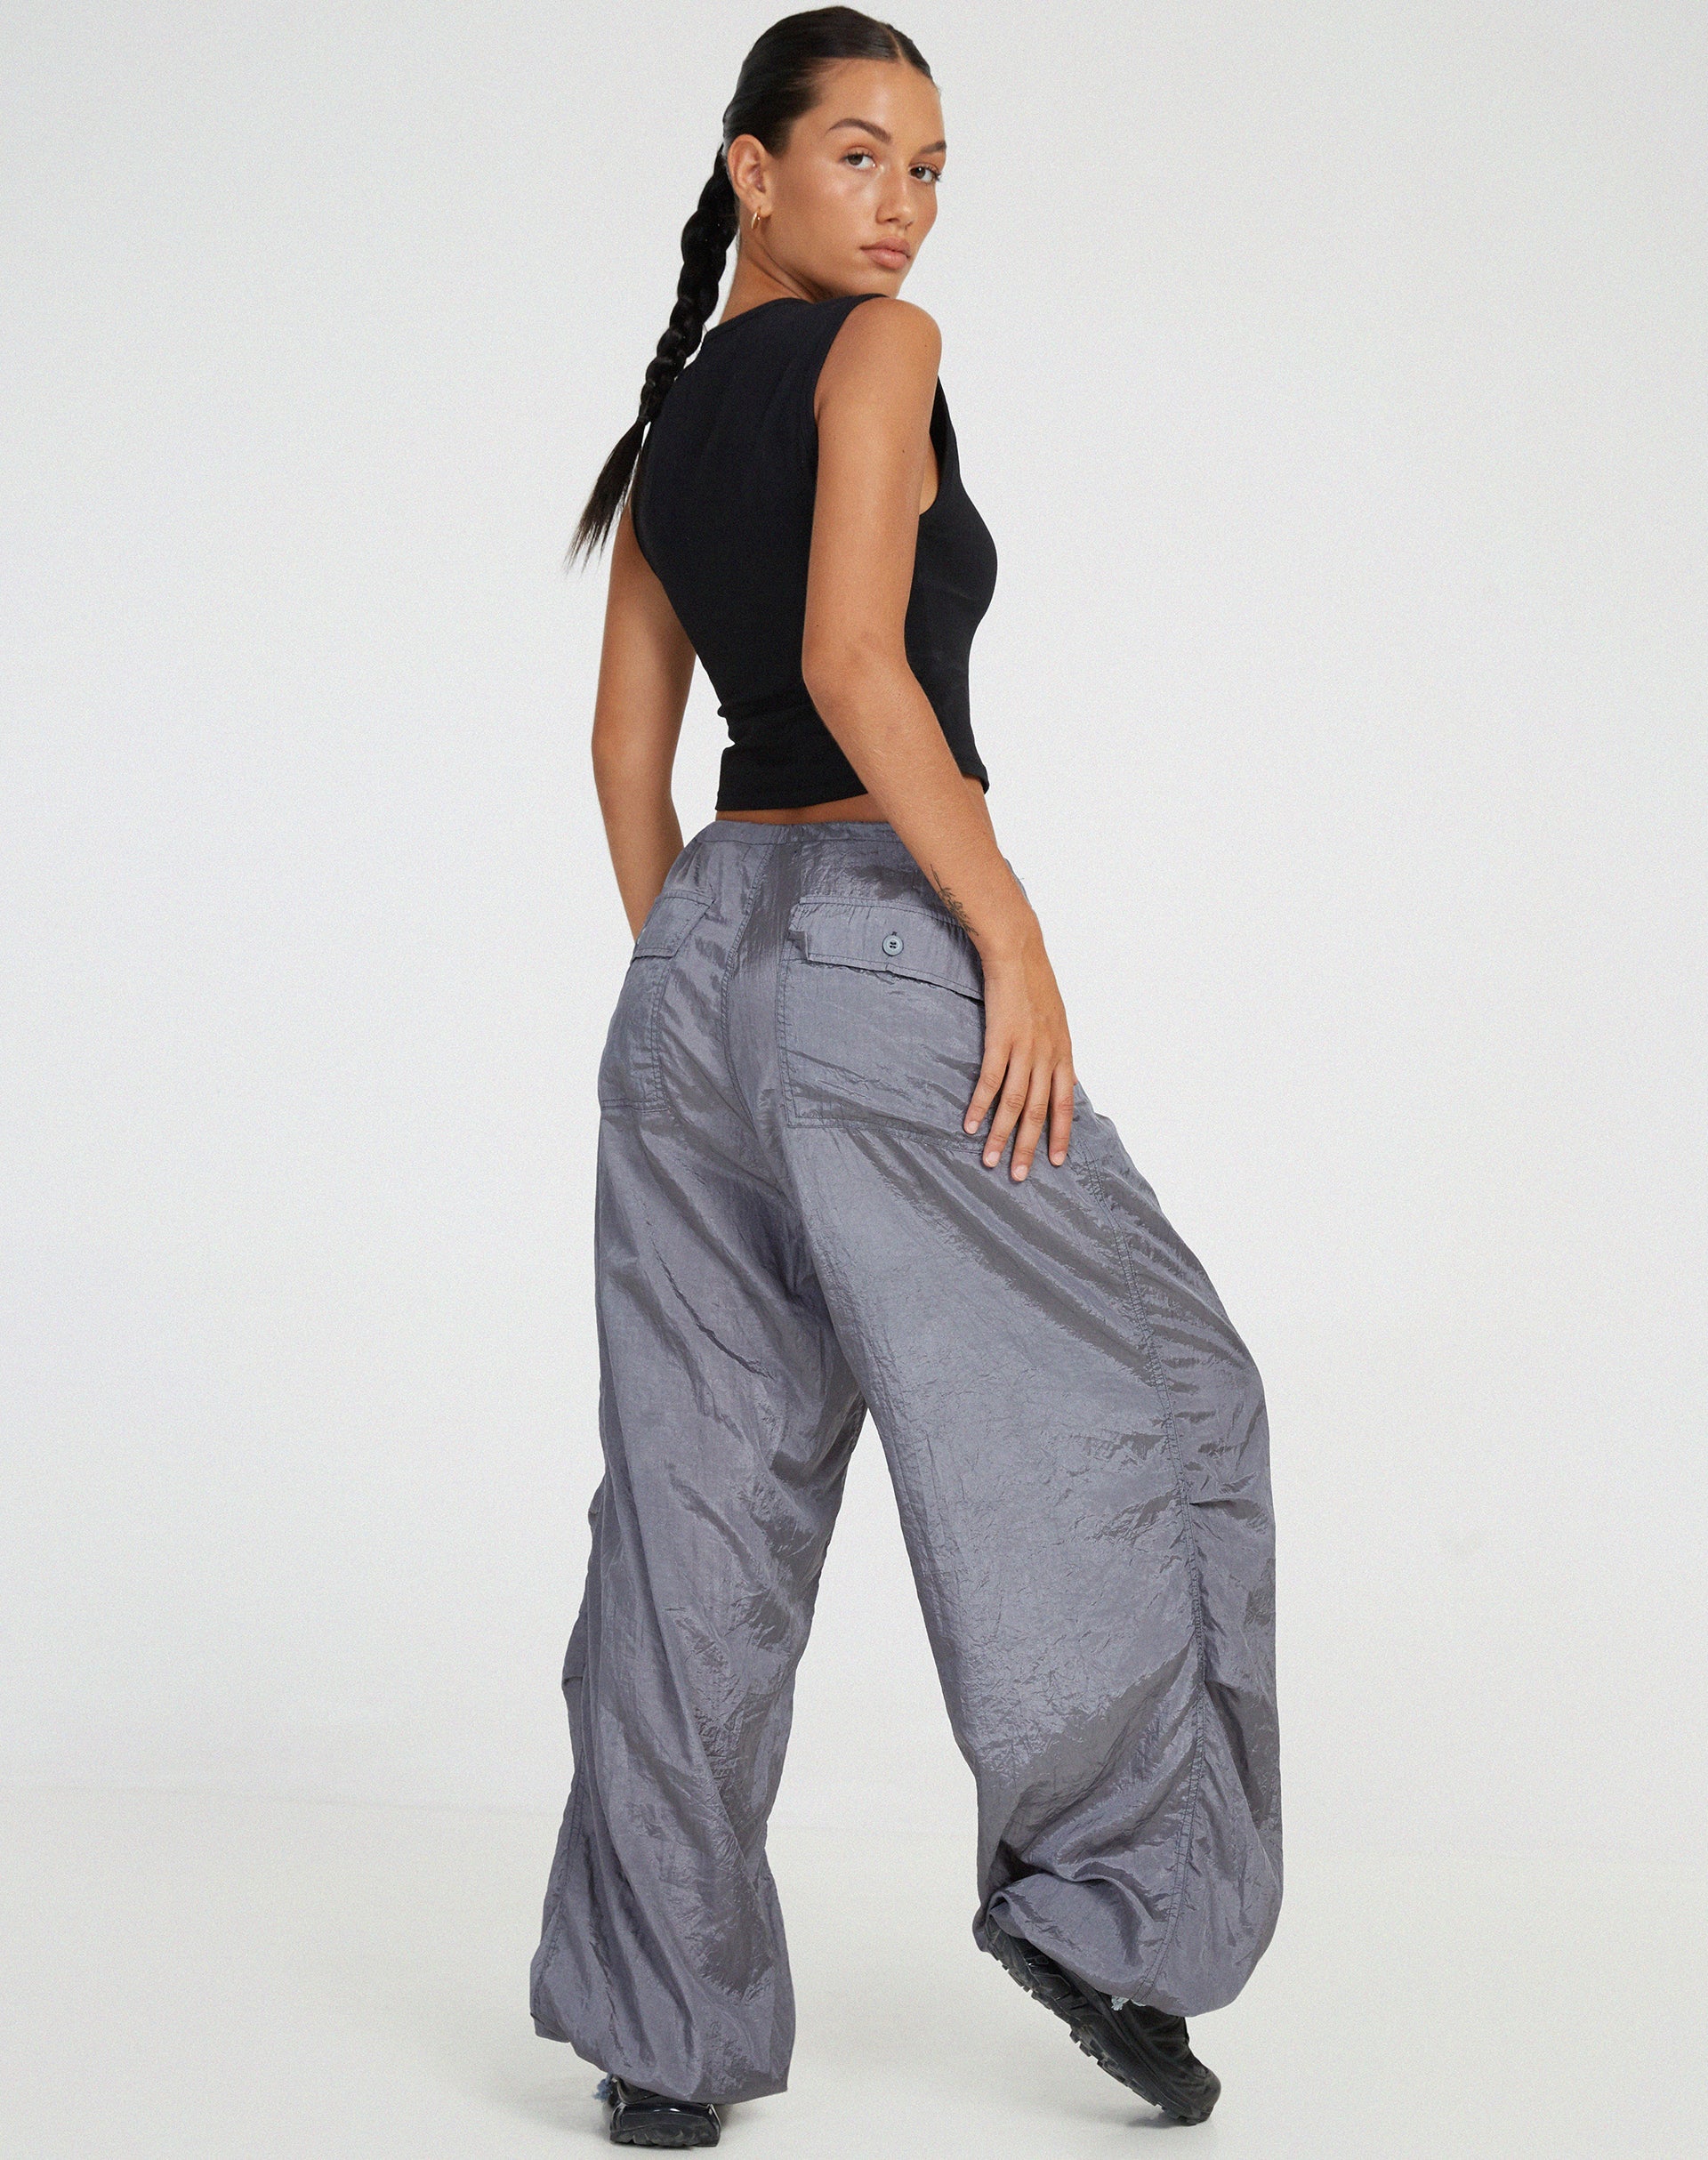 image of Chute Trouser in Parachute Cool Grey